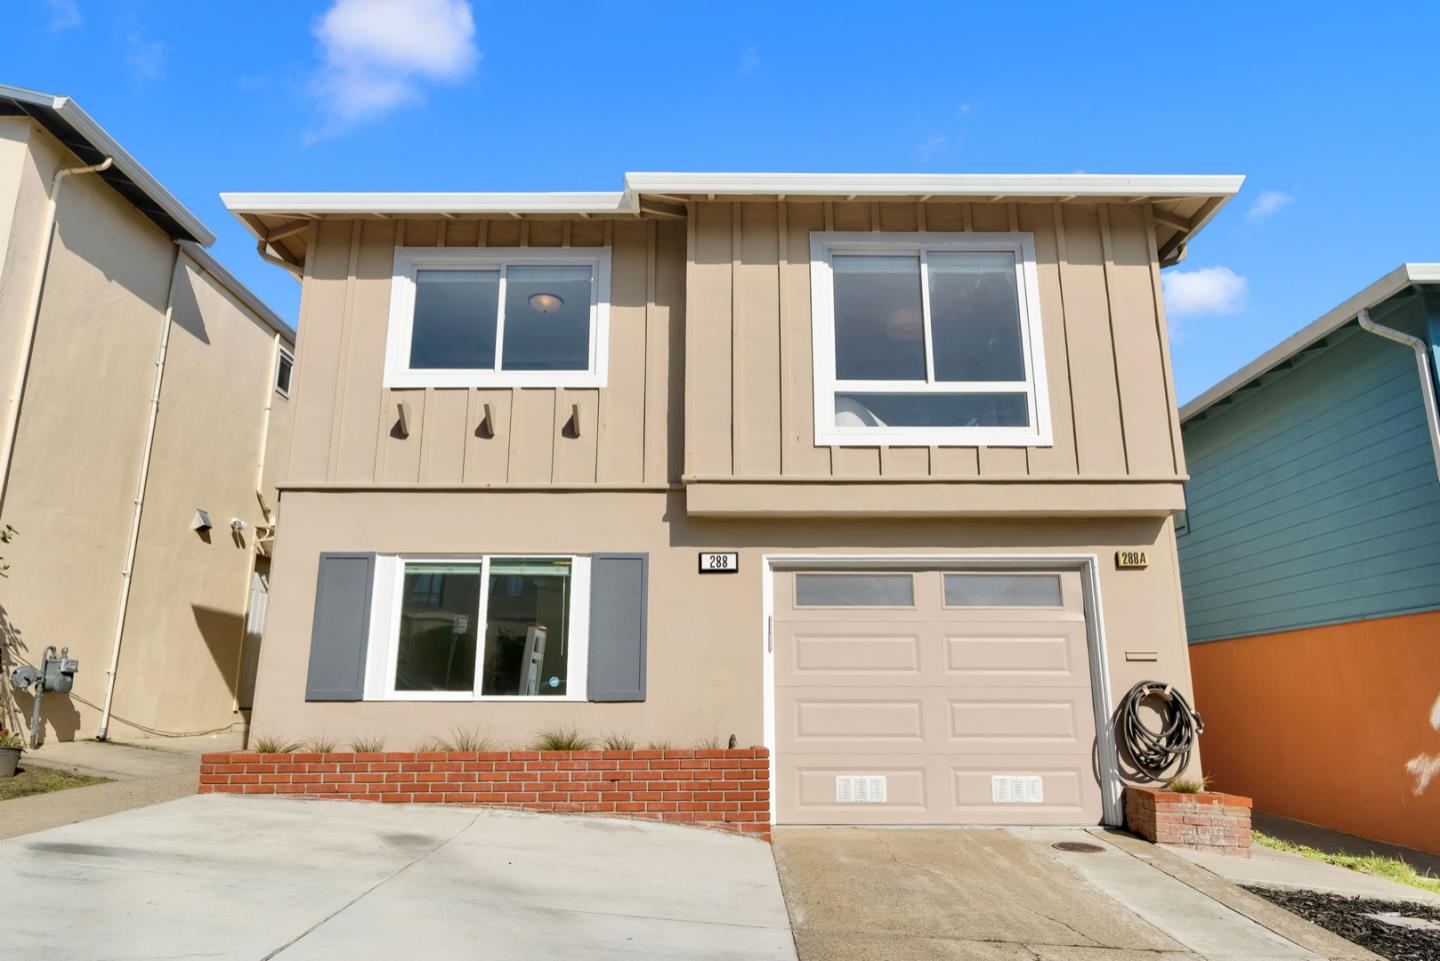 Welcome home to this beautiful & spacious 2-level SFH w/ attached ADU in Daly City. Enjoy the open floor plan w/ meticulous updates such as double pane windows, tankless water heater, 2 high-efficiency furnaces, recessed lighting & crown molding. Relax by the large living room windows that offer views of the SF Bay & Golden Gate Bridge. Kitchen w/ quality wood cabinets, quartz counters, bar seating & plenty of storage space. Down the hall, there are 3 spacious beds & 2 baths. Hallway bath w/ tub & primary bed ensuite w/ stand-in shower, the perfect combination. Downstairs, there is a bonus room w/ a full bath. ADU features 2 spacious beds, 1 full bath, living room w/ dining area & full kitchen. Enjoy the private backyard w/ patio & deck, great for outdoor dining, lounging & BBQ w/ your family & friends. 1-car garage parking & 2-car parking on the widened driveway. Enjoy the close proximity of many different food options, grocery stores & shopping at Serramonte Center.